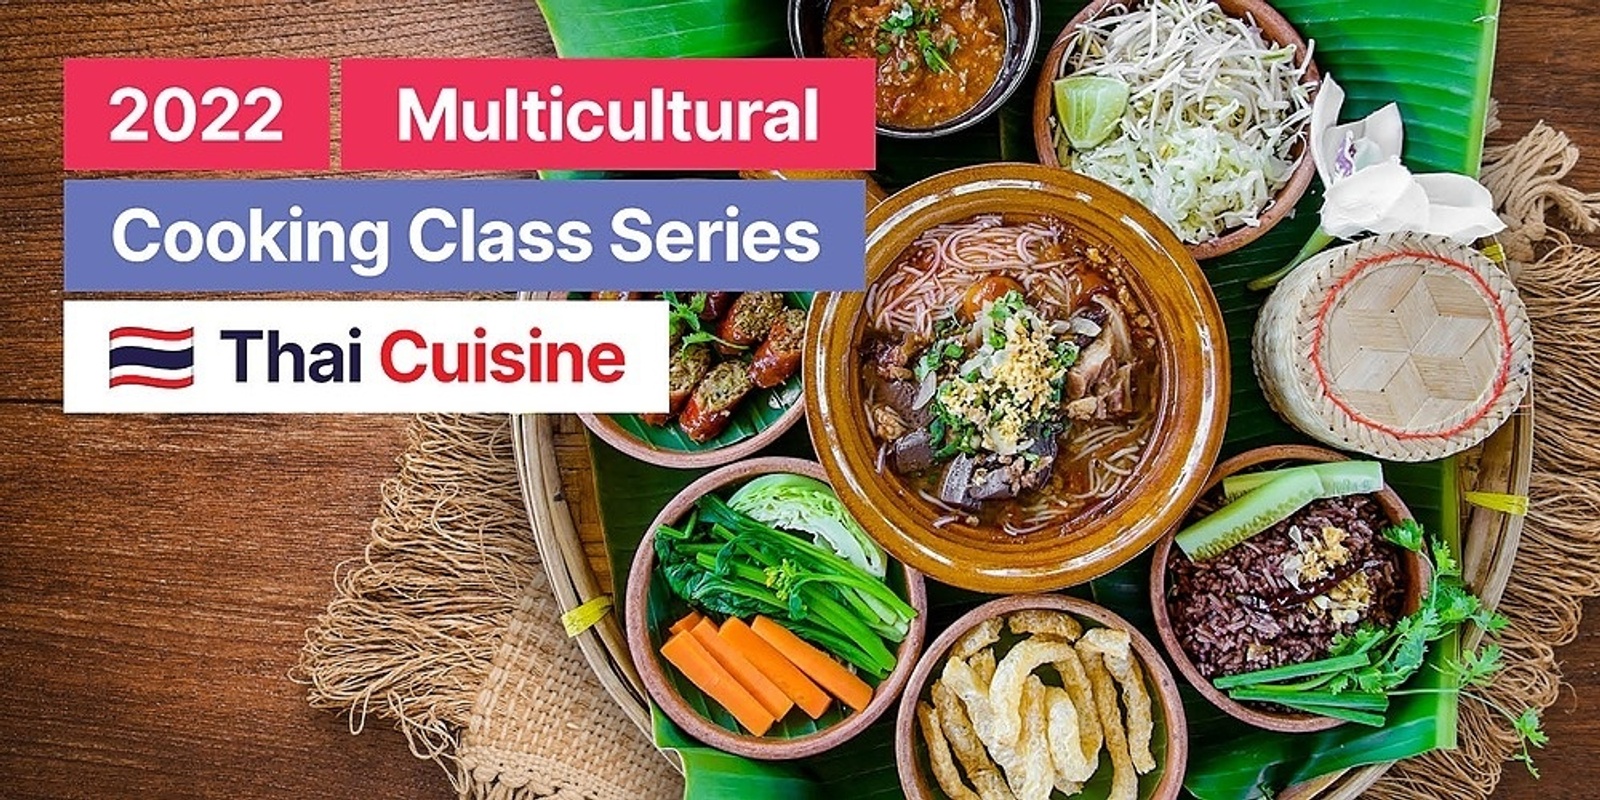 Banner image for 2022 Multicultural Cooking Class Series - Thai Cuisine